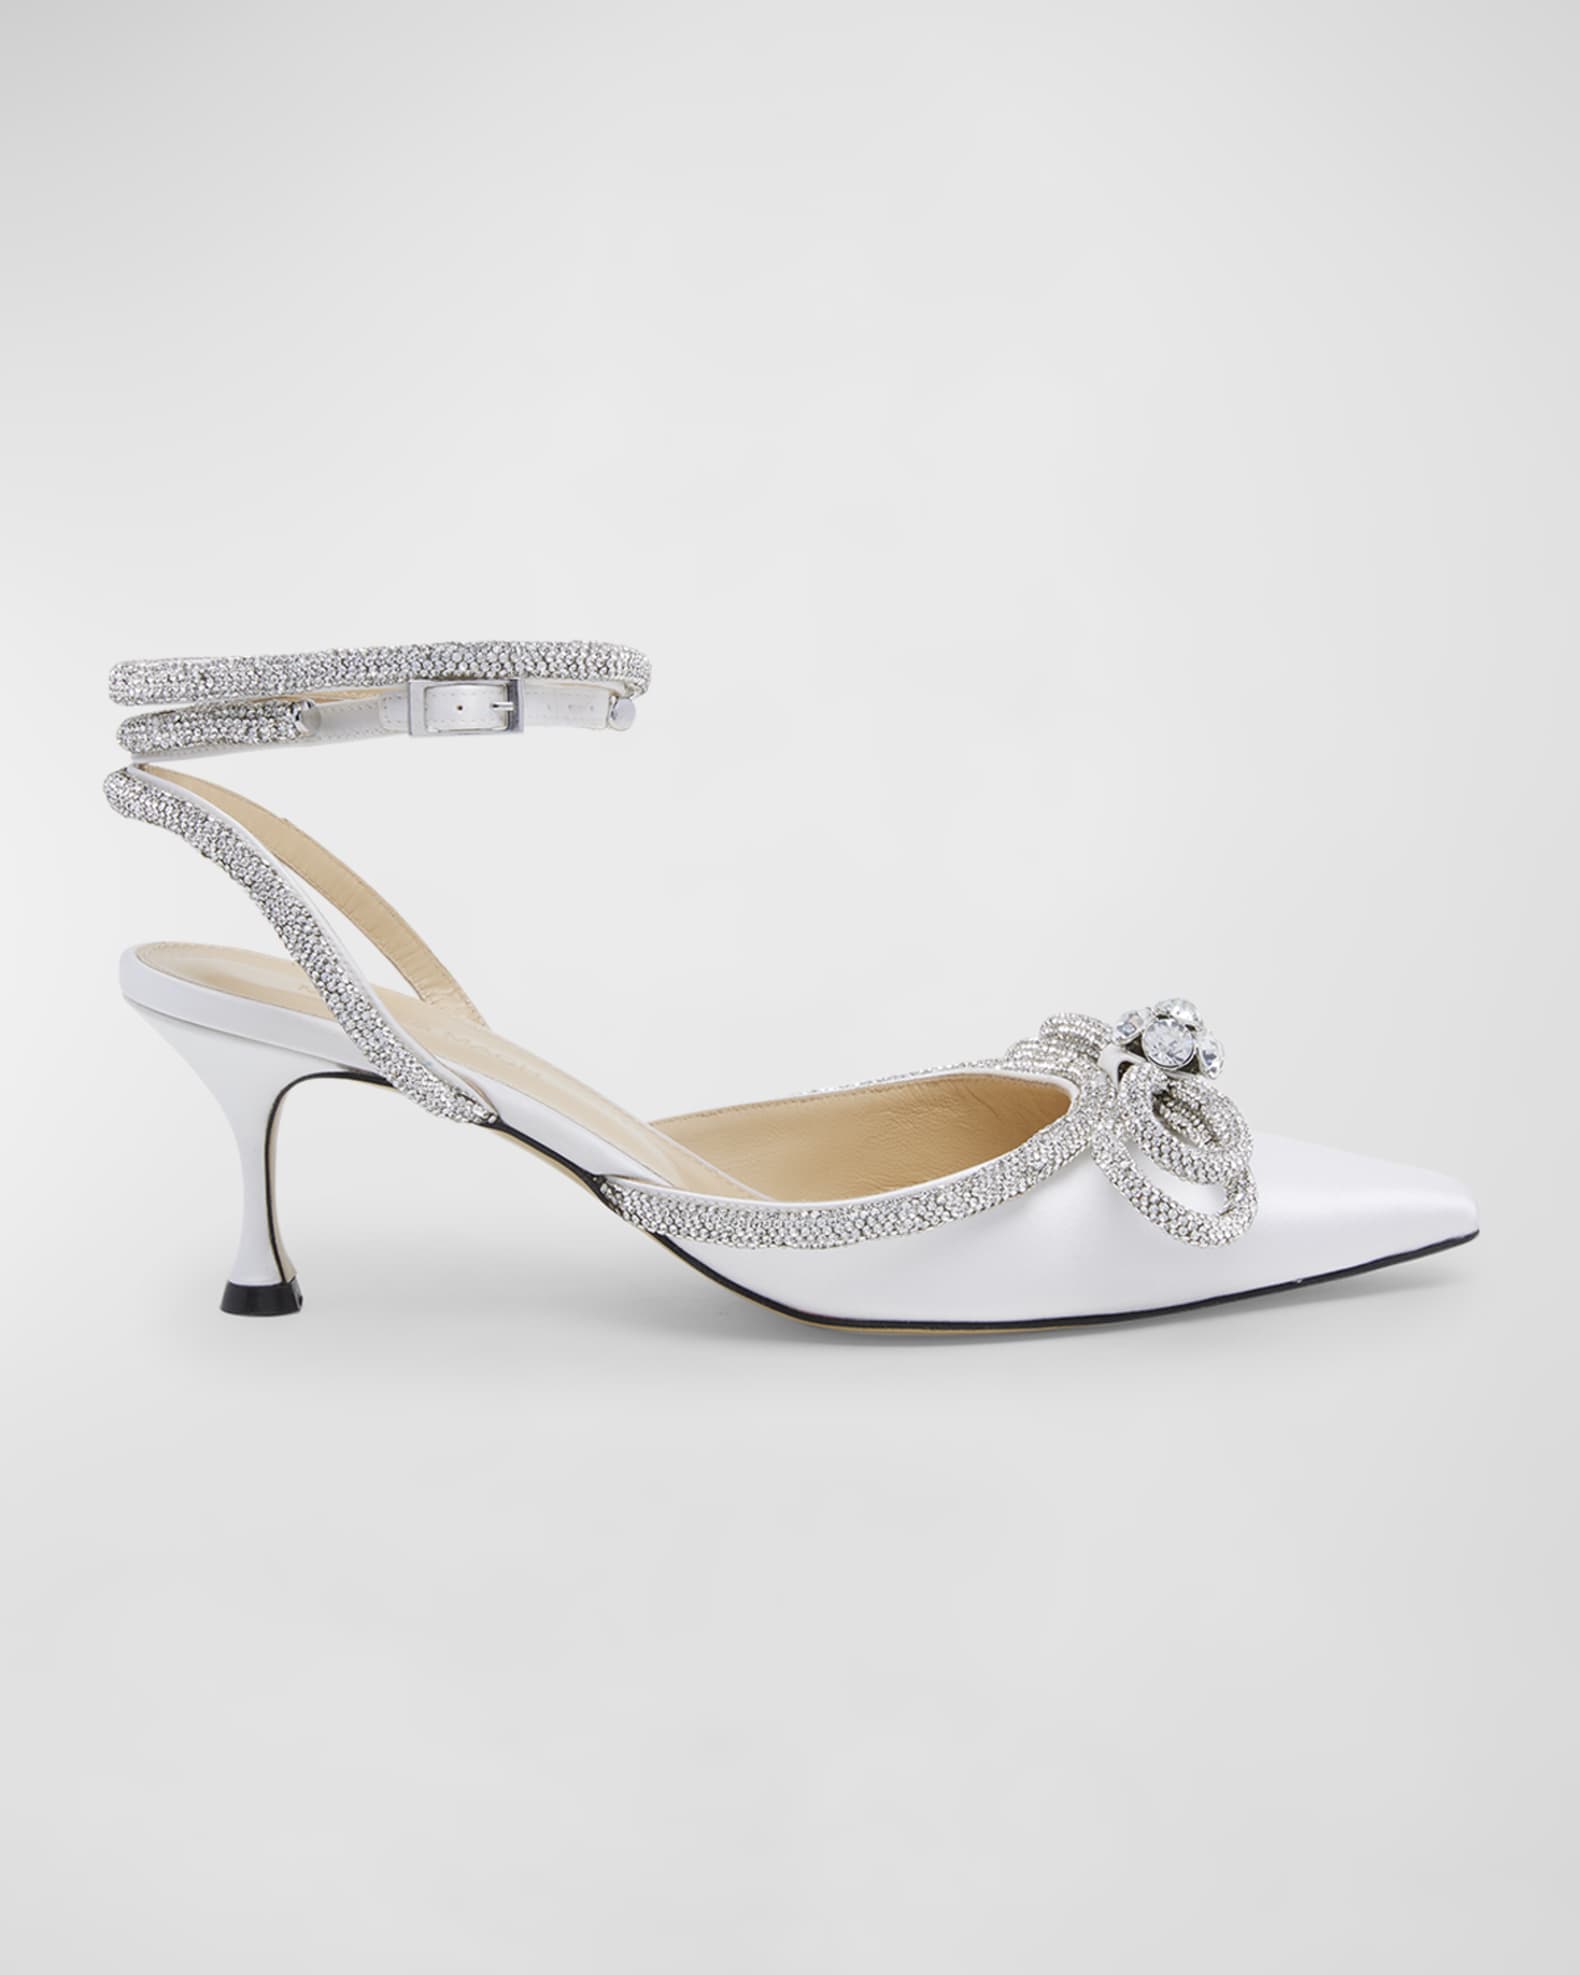 Strass Bow Double Ankle-Strap Kitten Pumps | Neiman Marcus